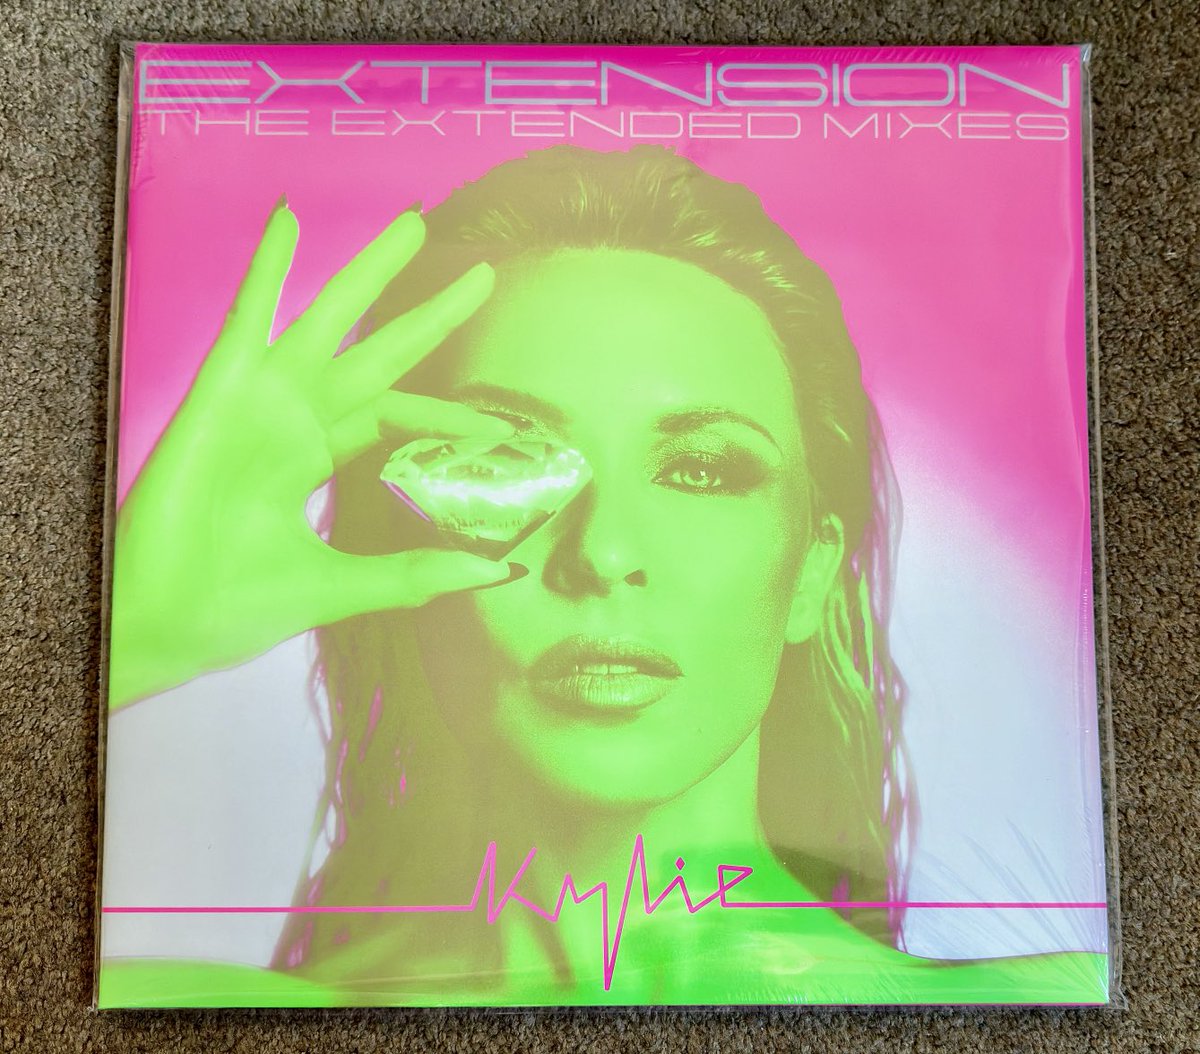 #NewArrival #KylieMinogue Extension. A surprise delivery today - surprised as tracking still shows it ‘in transit’.  Great to get this before the end of the year! 🎶🕺🔥💎

#KylieTension #Remixes #ExtendedMixes #Vinyl #ColouredVinyl